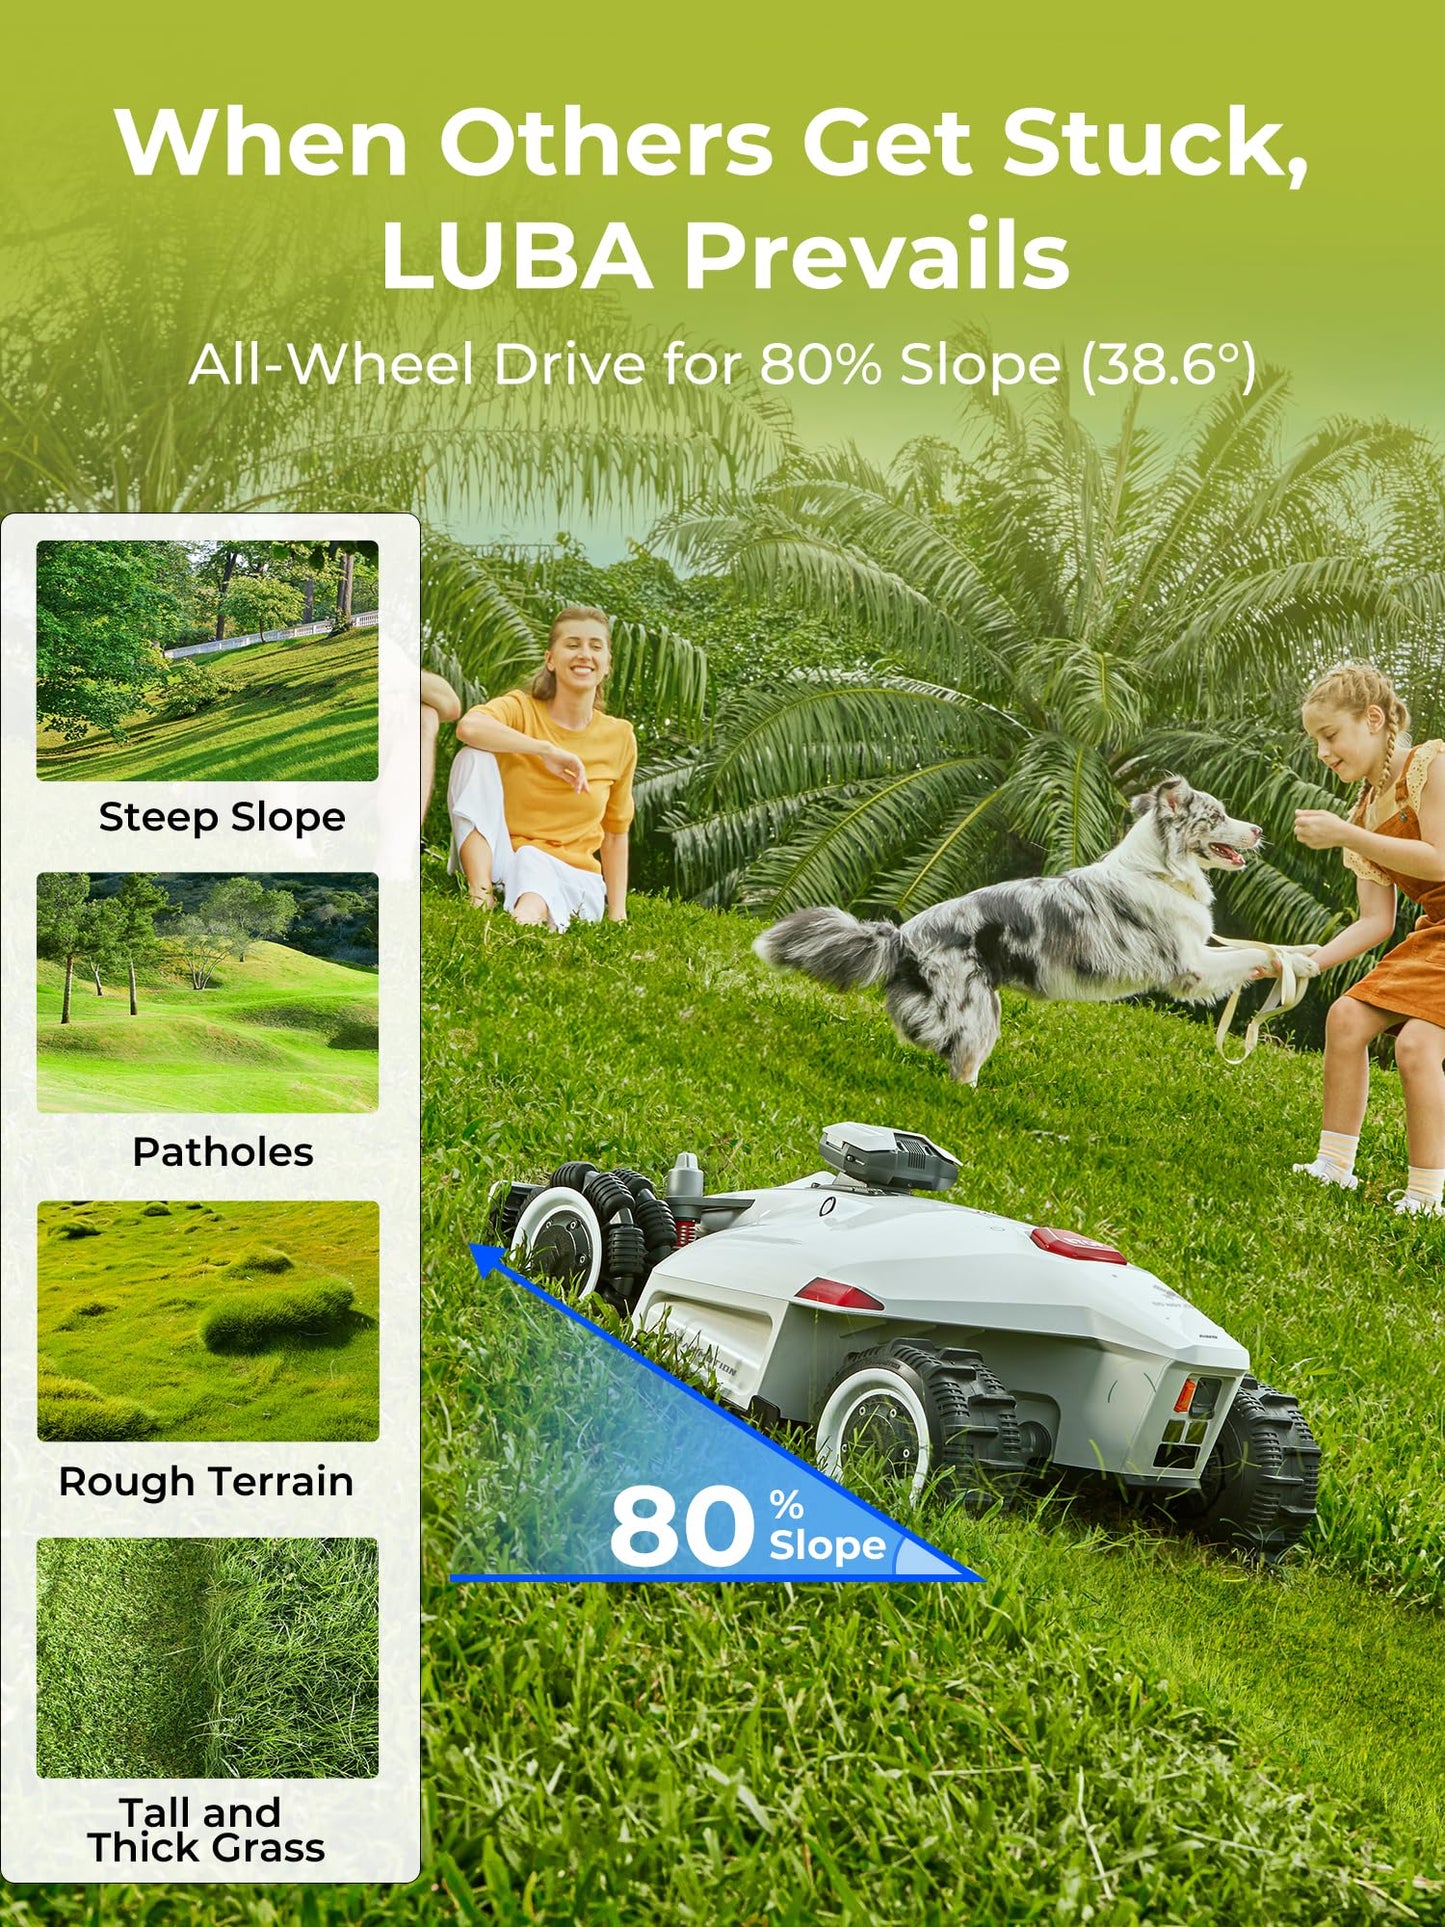 LUBA 2 AWD 5000 Robot Lawn Mower, Perimeter Wire Free Robotic Lawnmower for 1.25 Acres Lawn 80% Slope, Cut Height 1.0"-2.7", APP Control, Compatible with Alexa, All-Wheel Drive, Multi-Zone Management